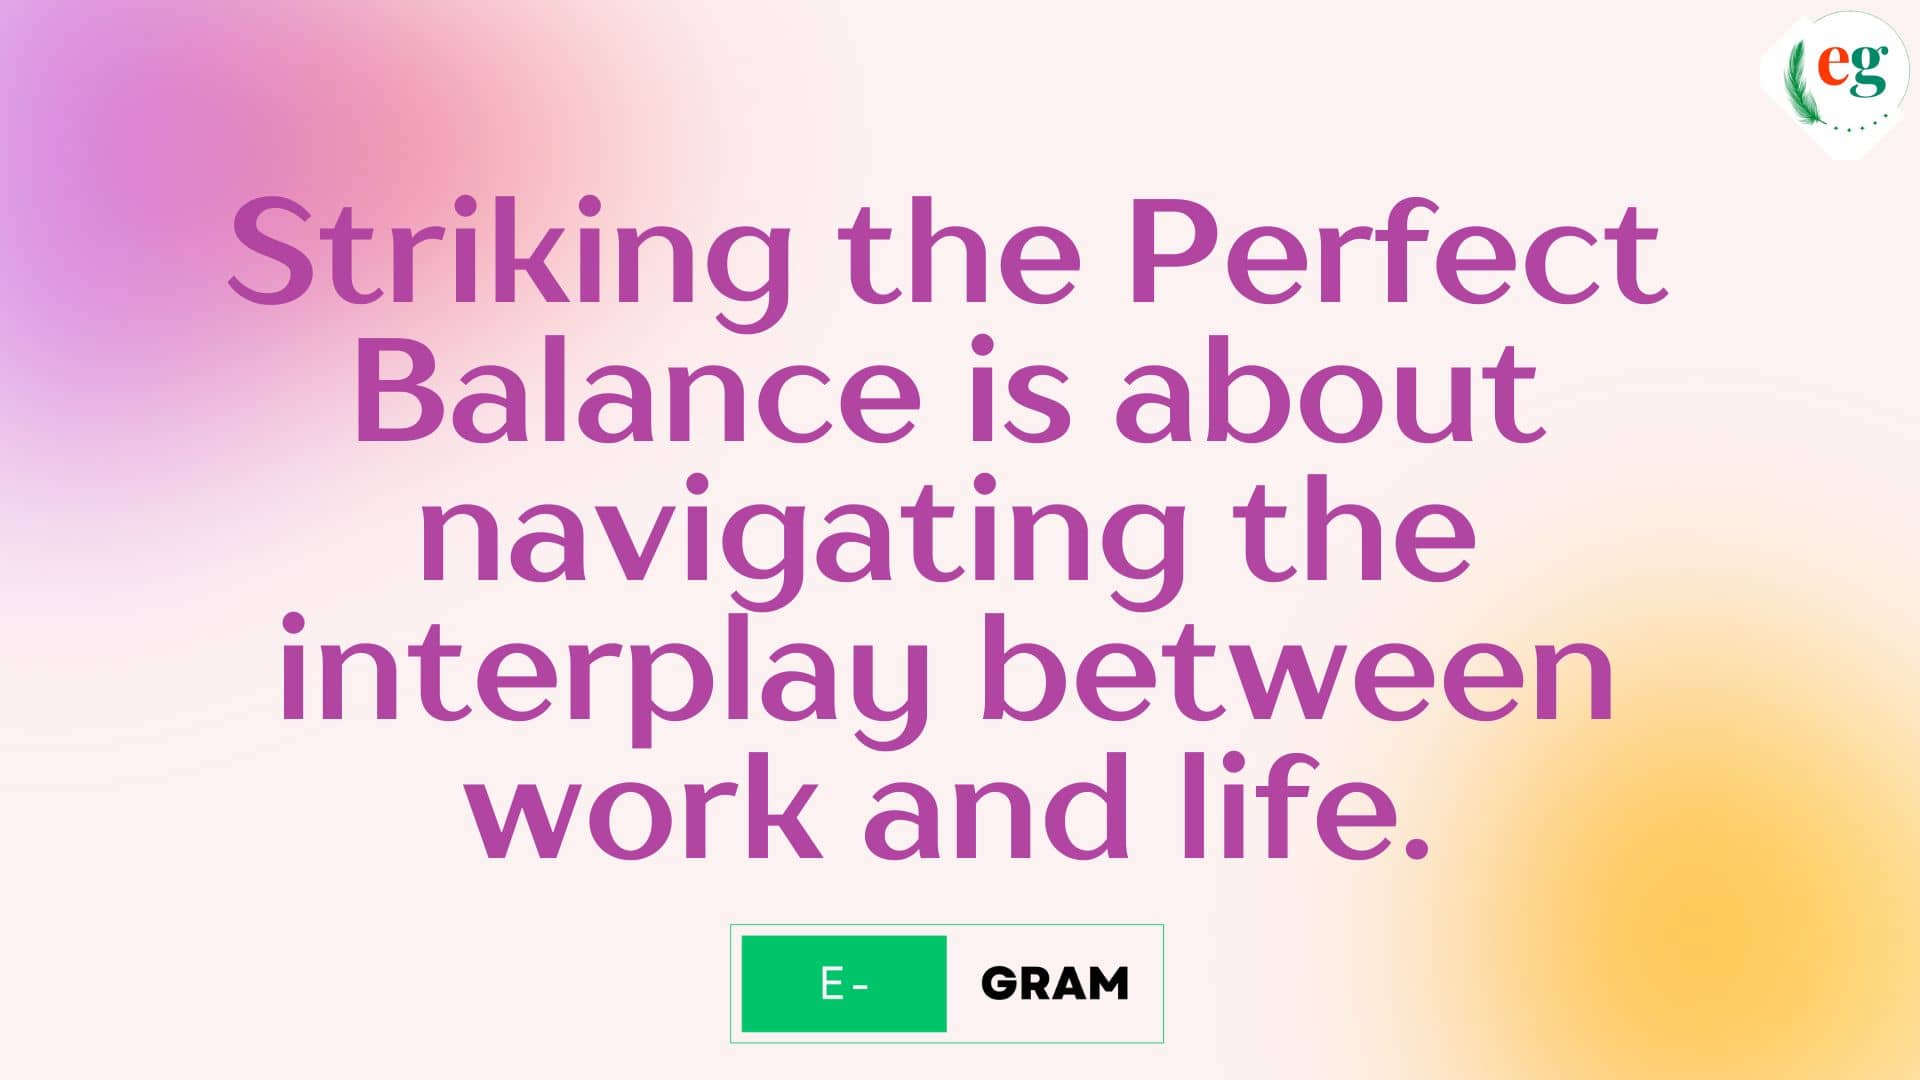 Striking the Perfect Balance is about navigating the interplay between work and life.